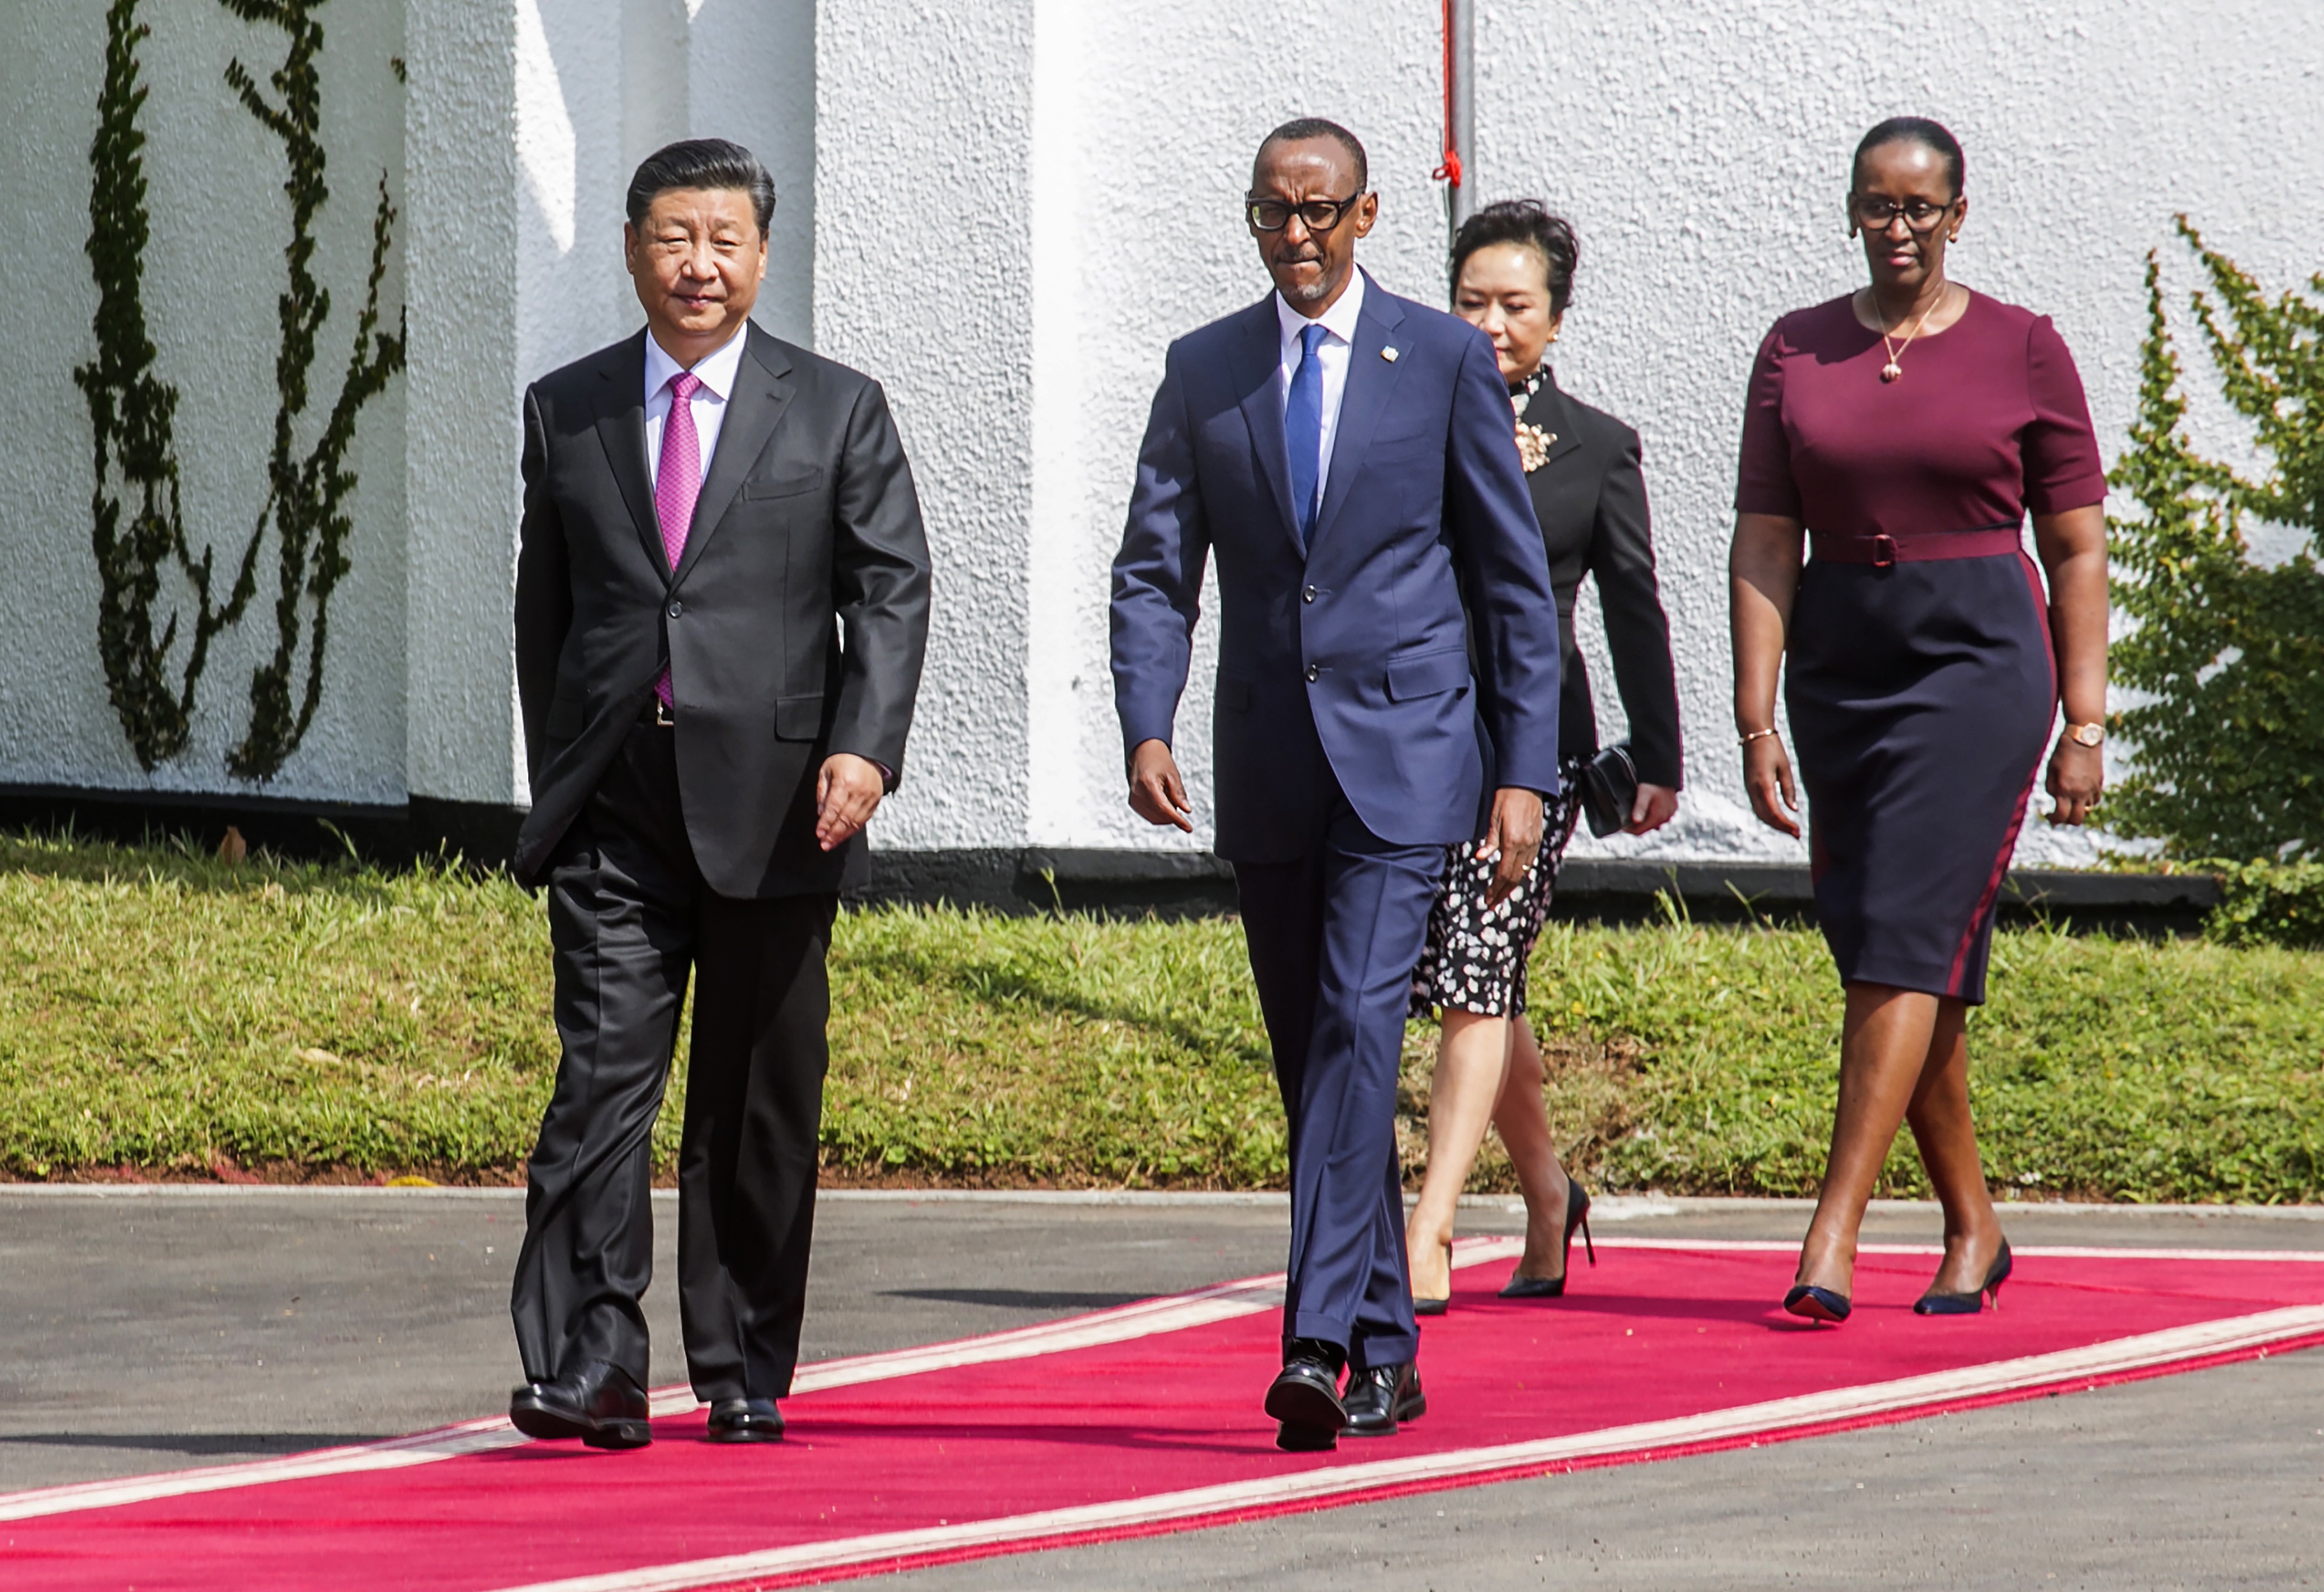 Rwandan President Paul Kagame, right, and Chinese President Xi Jinping, followed by their wives Jannette Kagame and Peng Liyuan arrive at Rwanda's State House on Monday, July 23, 2018. Xi is on a two-day state visit to Rwanda (AP Photo)